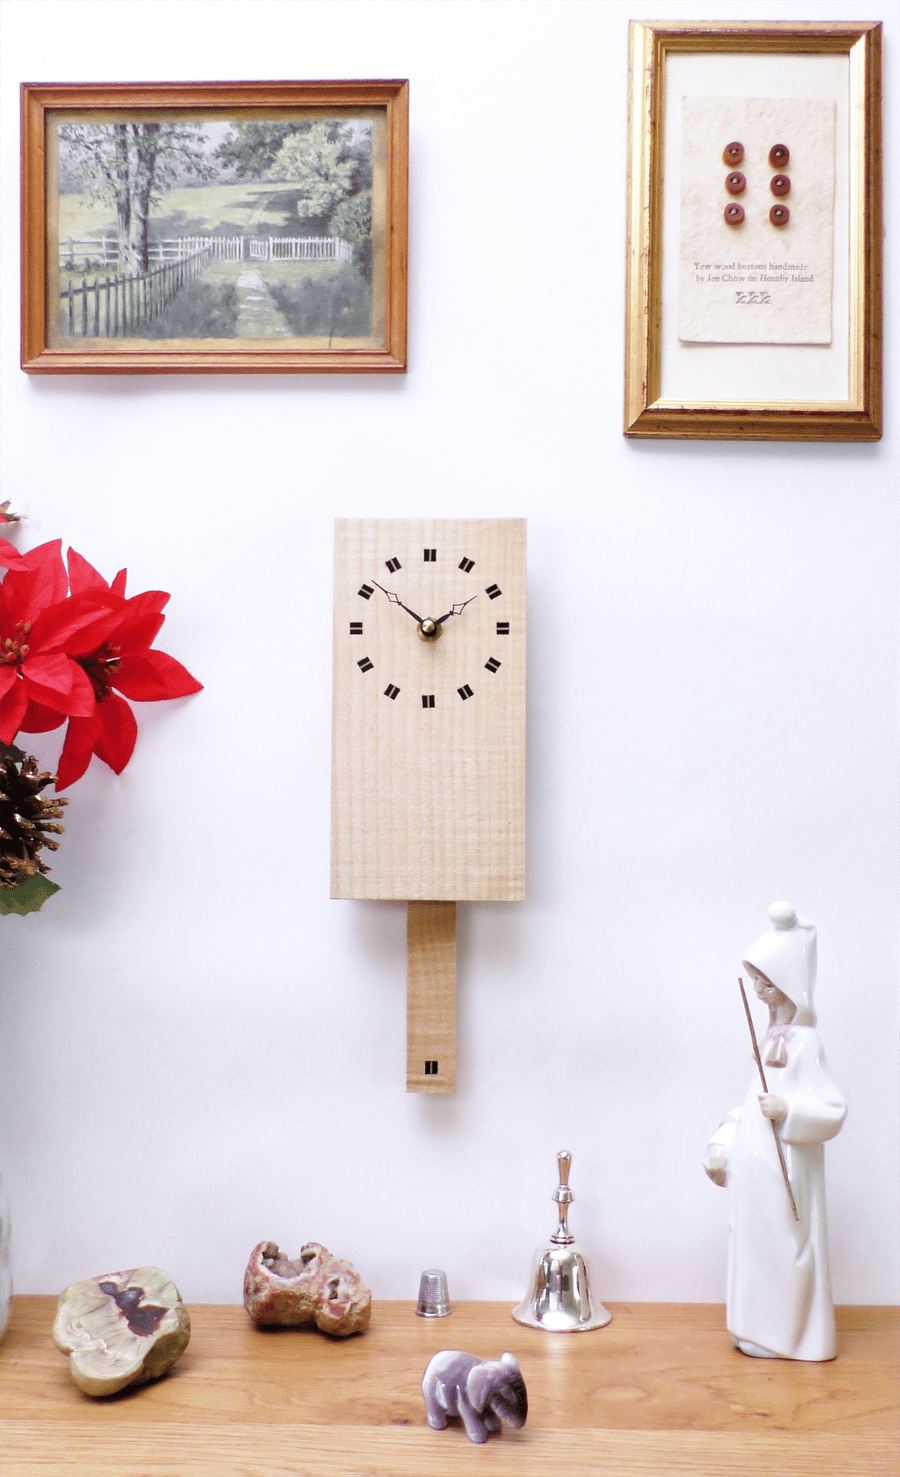 Wooden Pendulum Wall Clock in ripple sycamore & inlaid ebony Squares